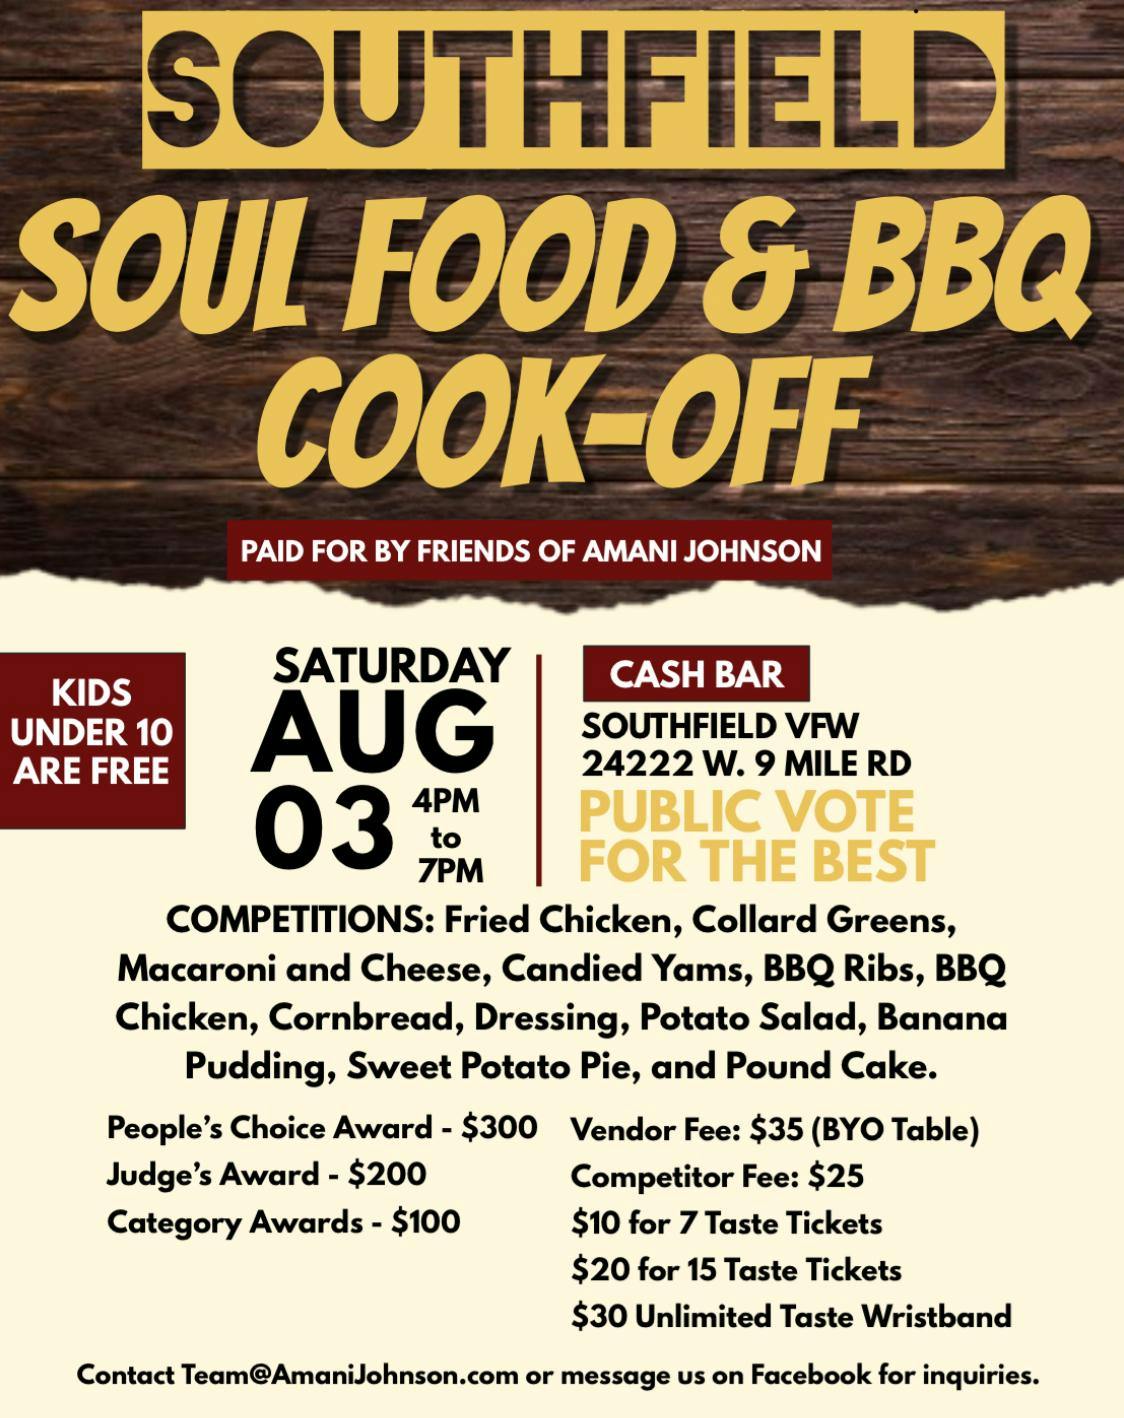 Southfield Soul Food & BBQ Cook-Off